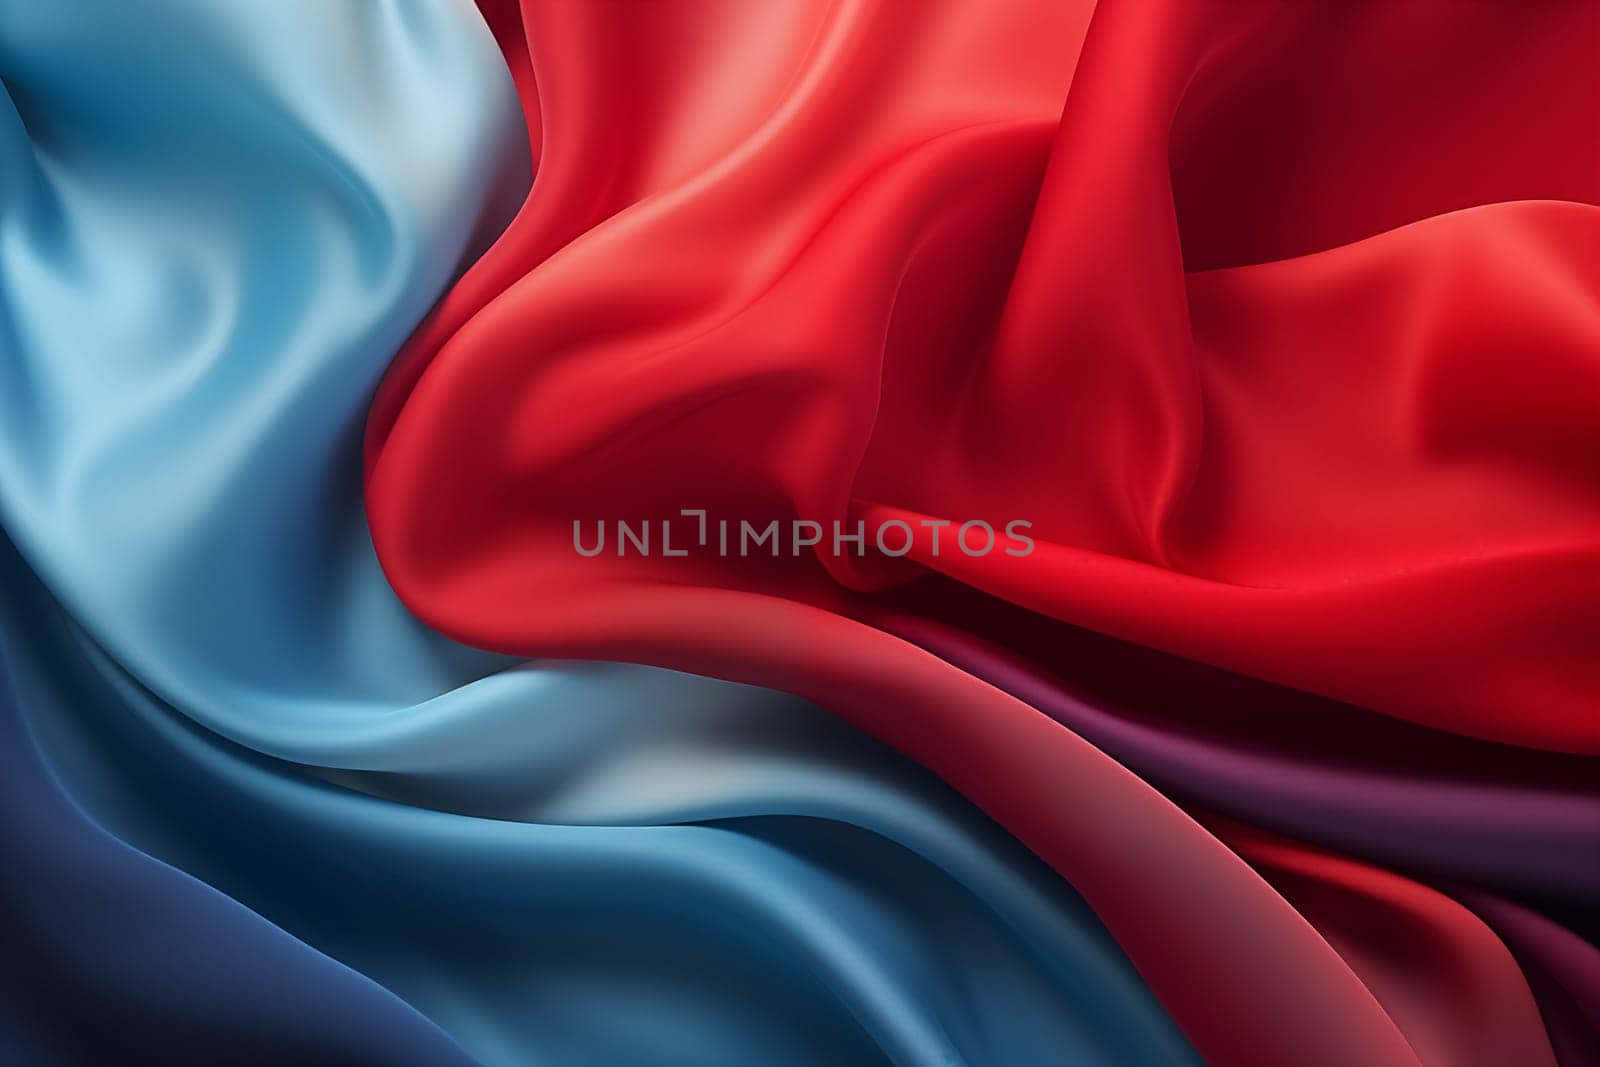 A colorful background with a red and blue fabric by Nadtochiy